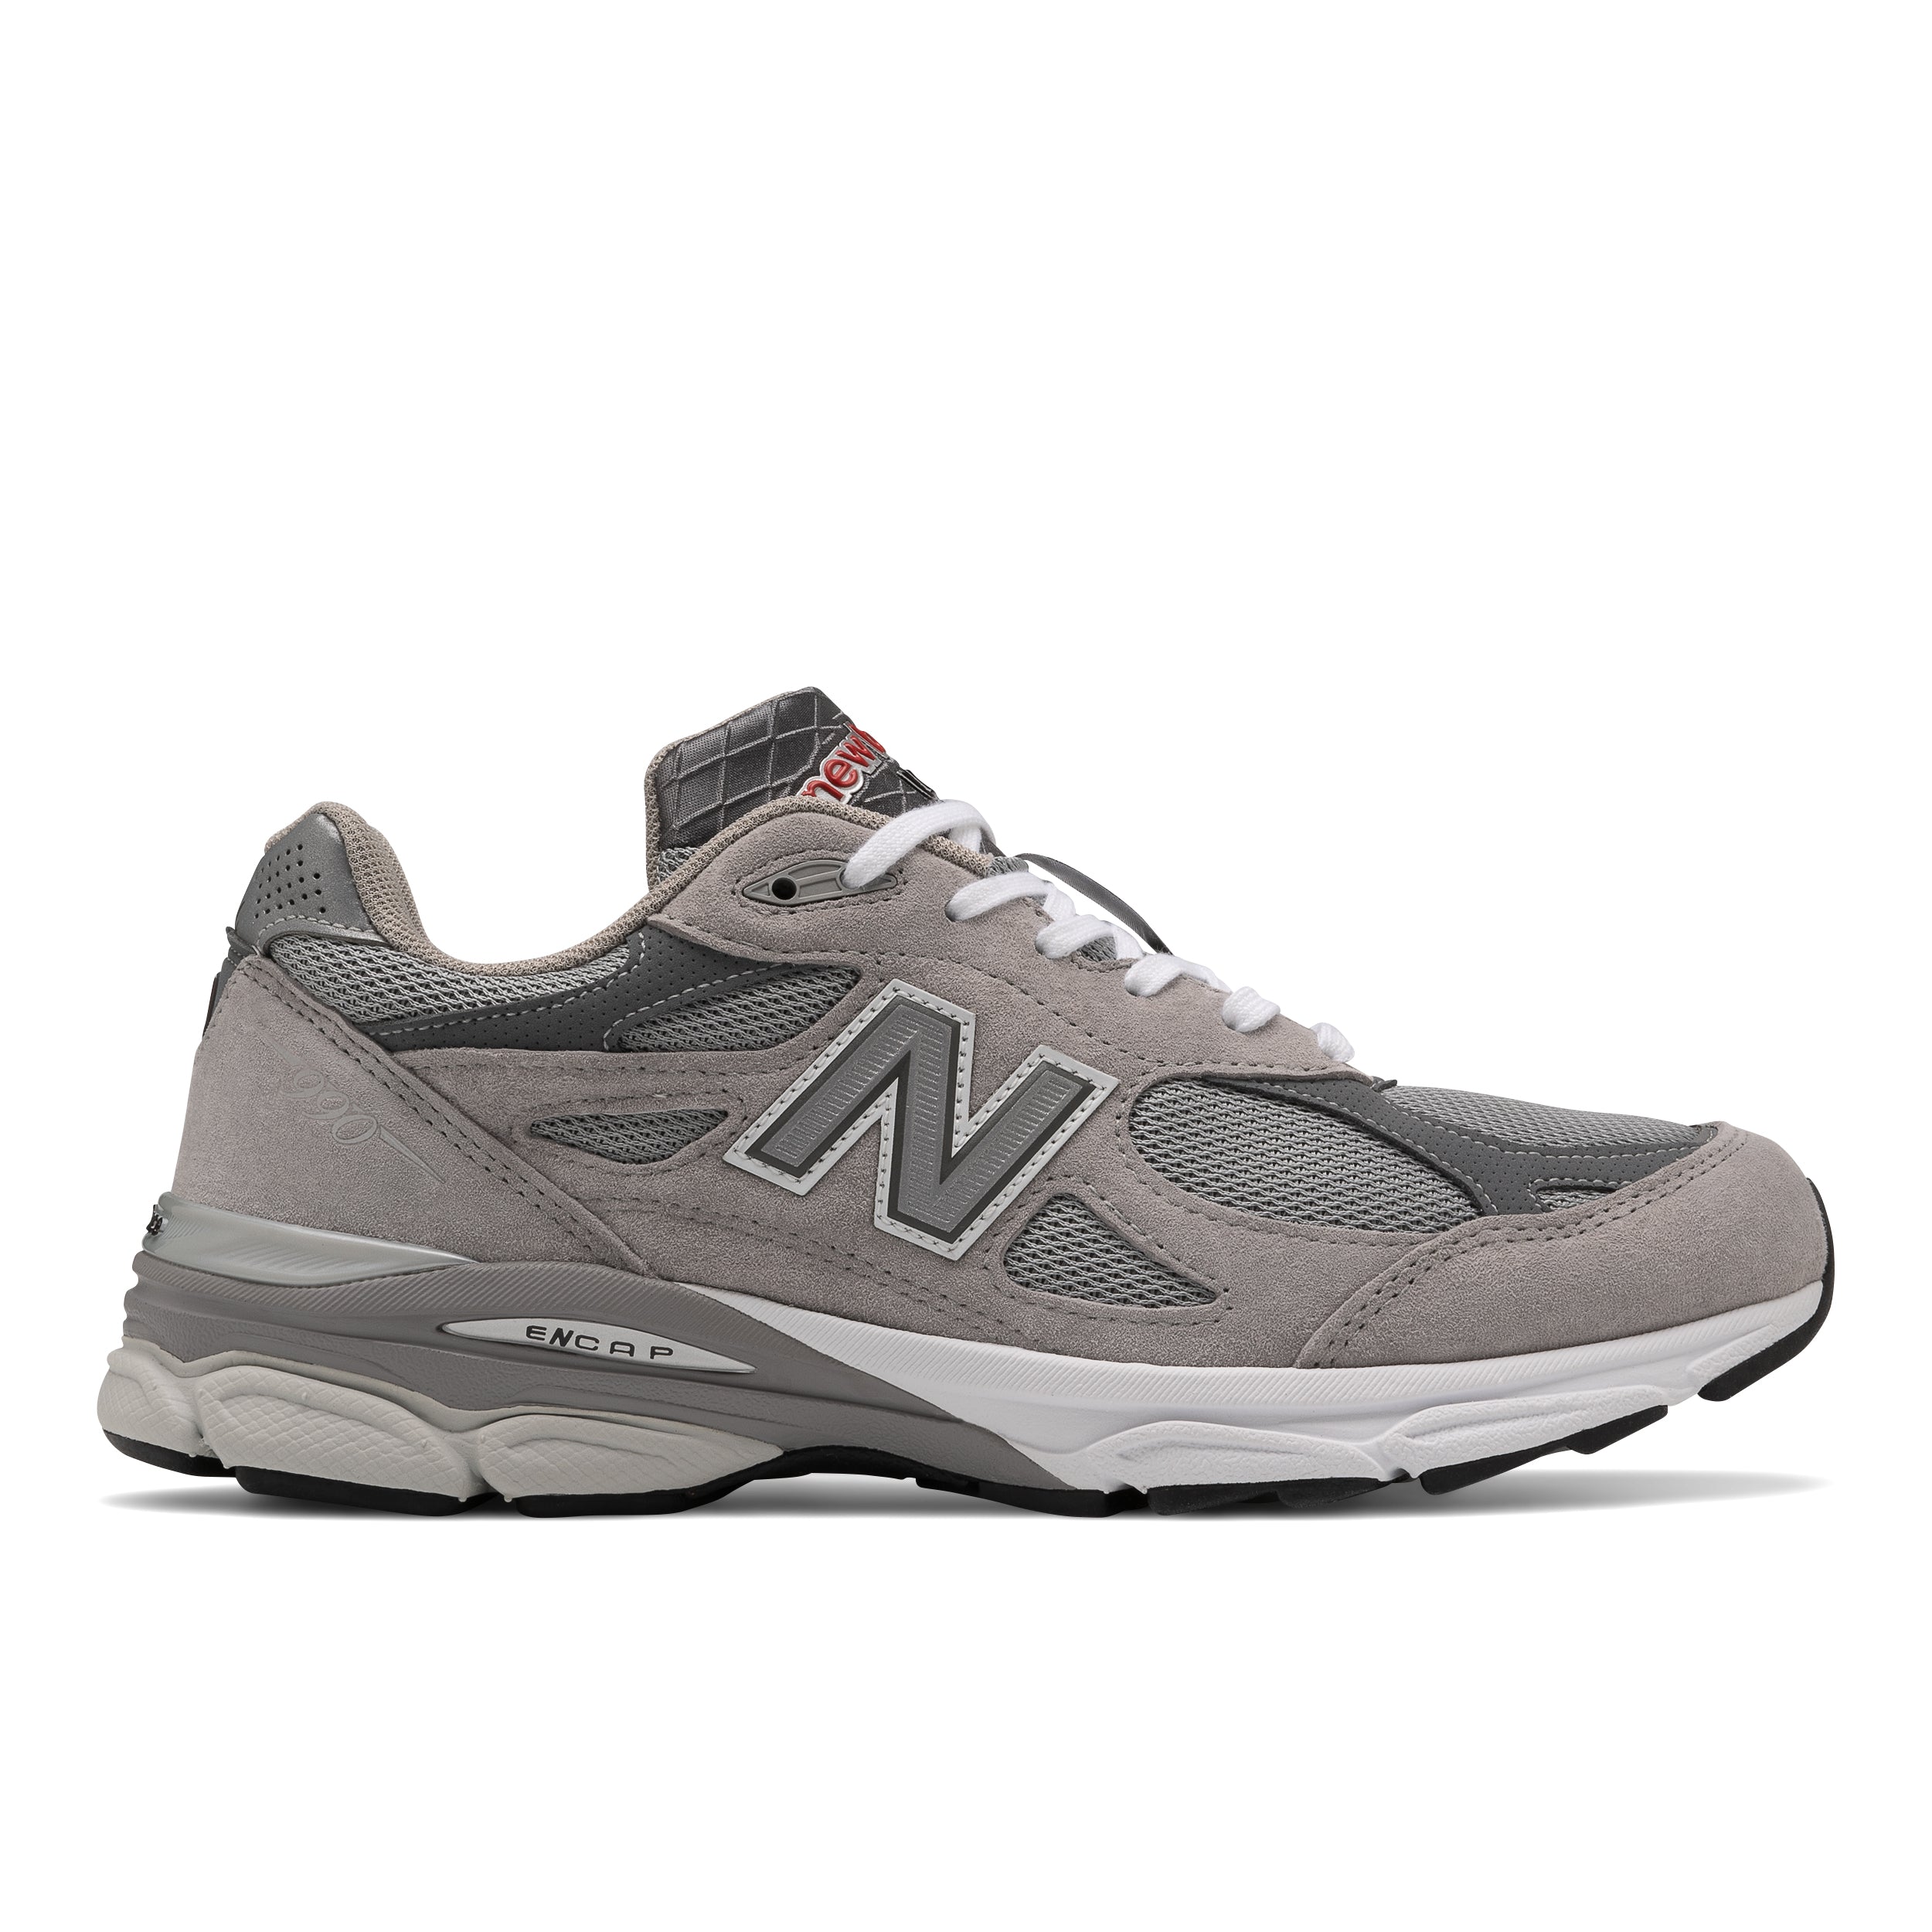 NEW BALANCE M990GY3 - GREY MADE IN THE USA